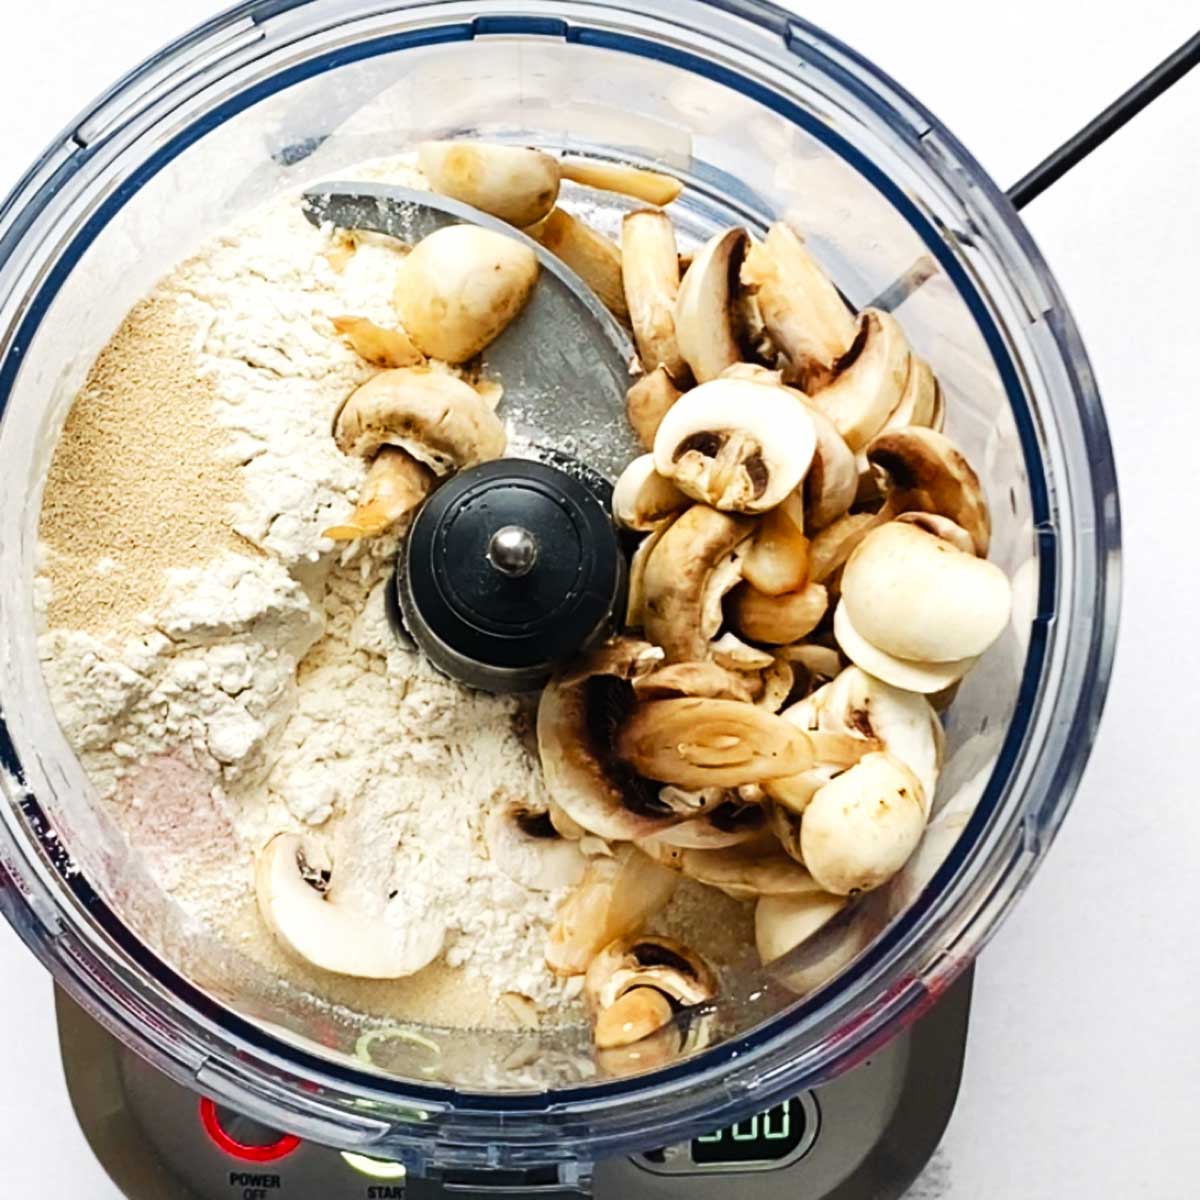 In a food processor, combine all dry ingredients: bread flour, yeast, sugar, salt. Add the cooked sliced mushrooms.